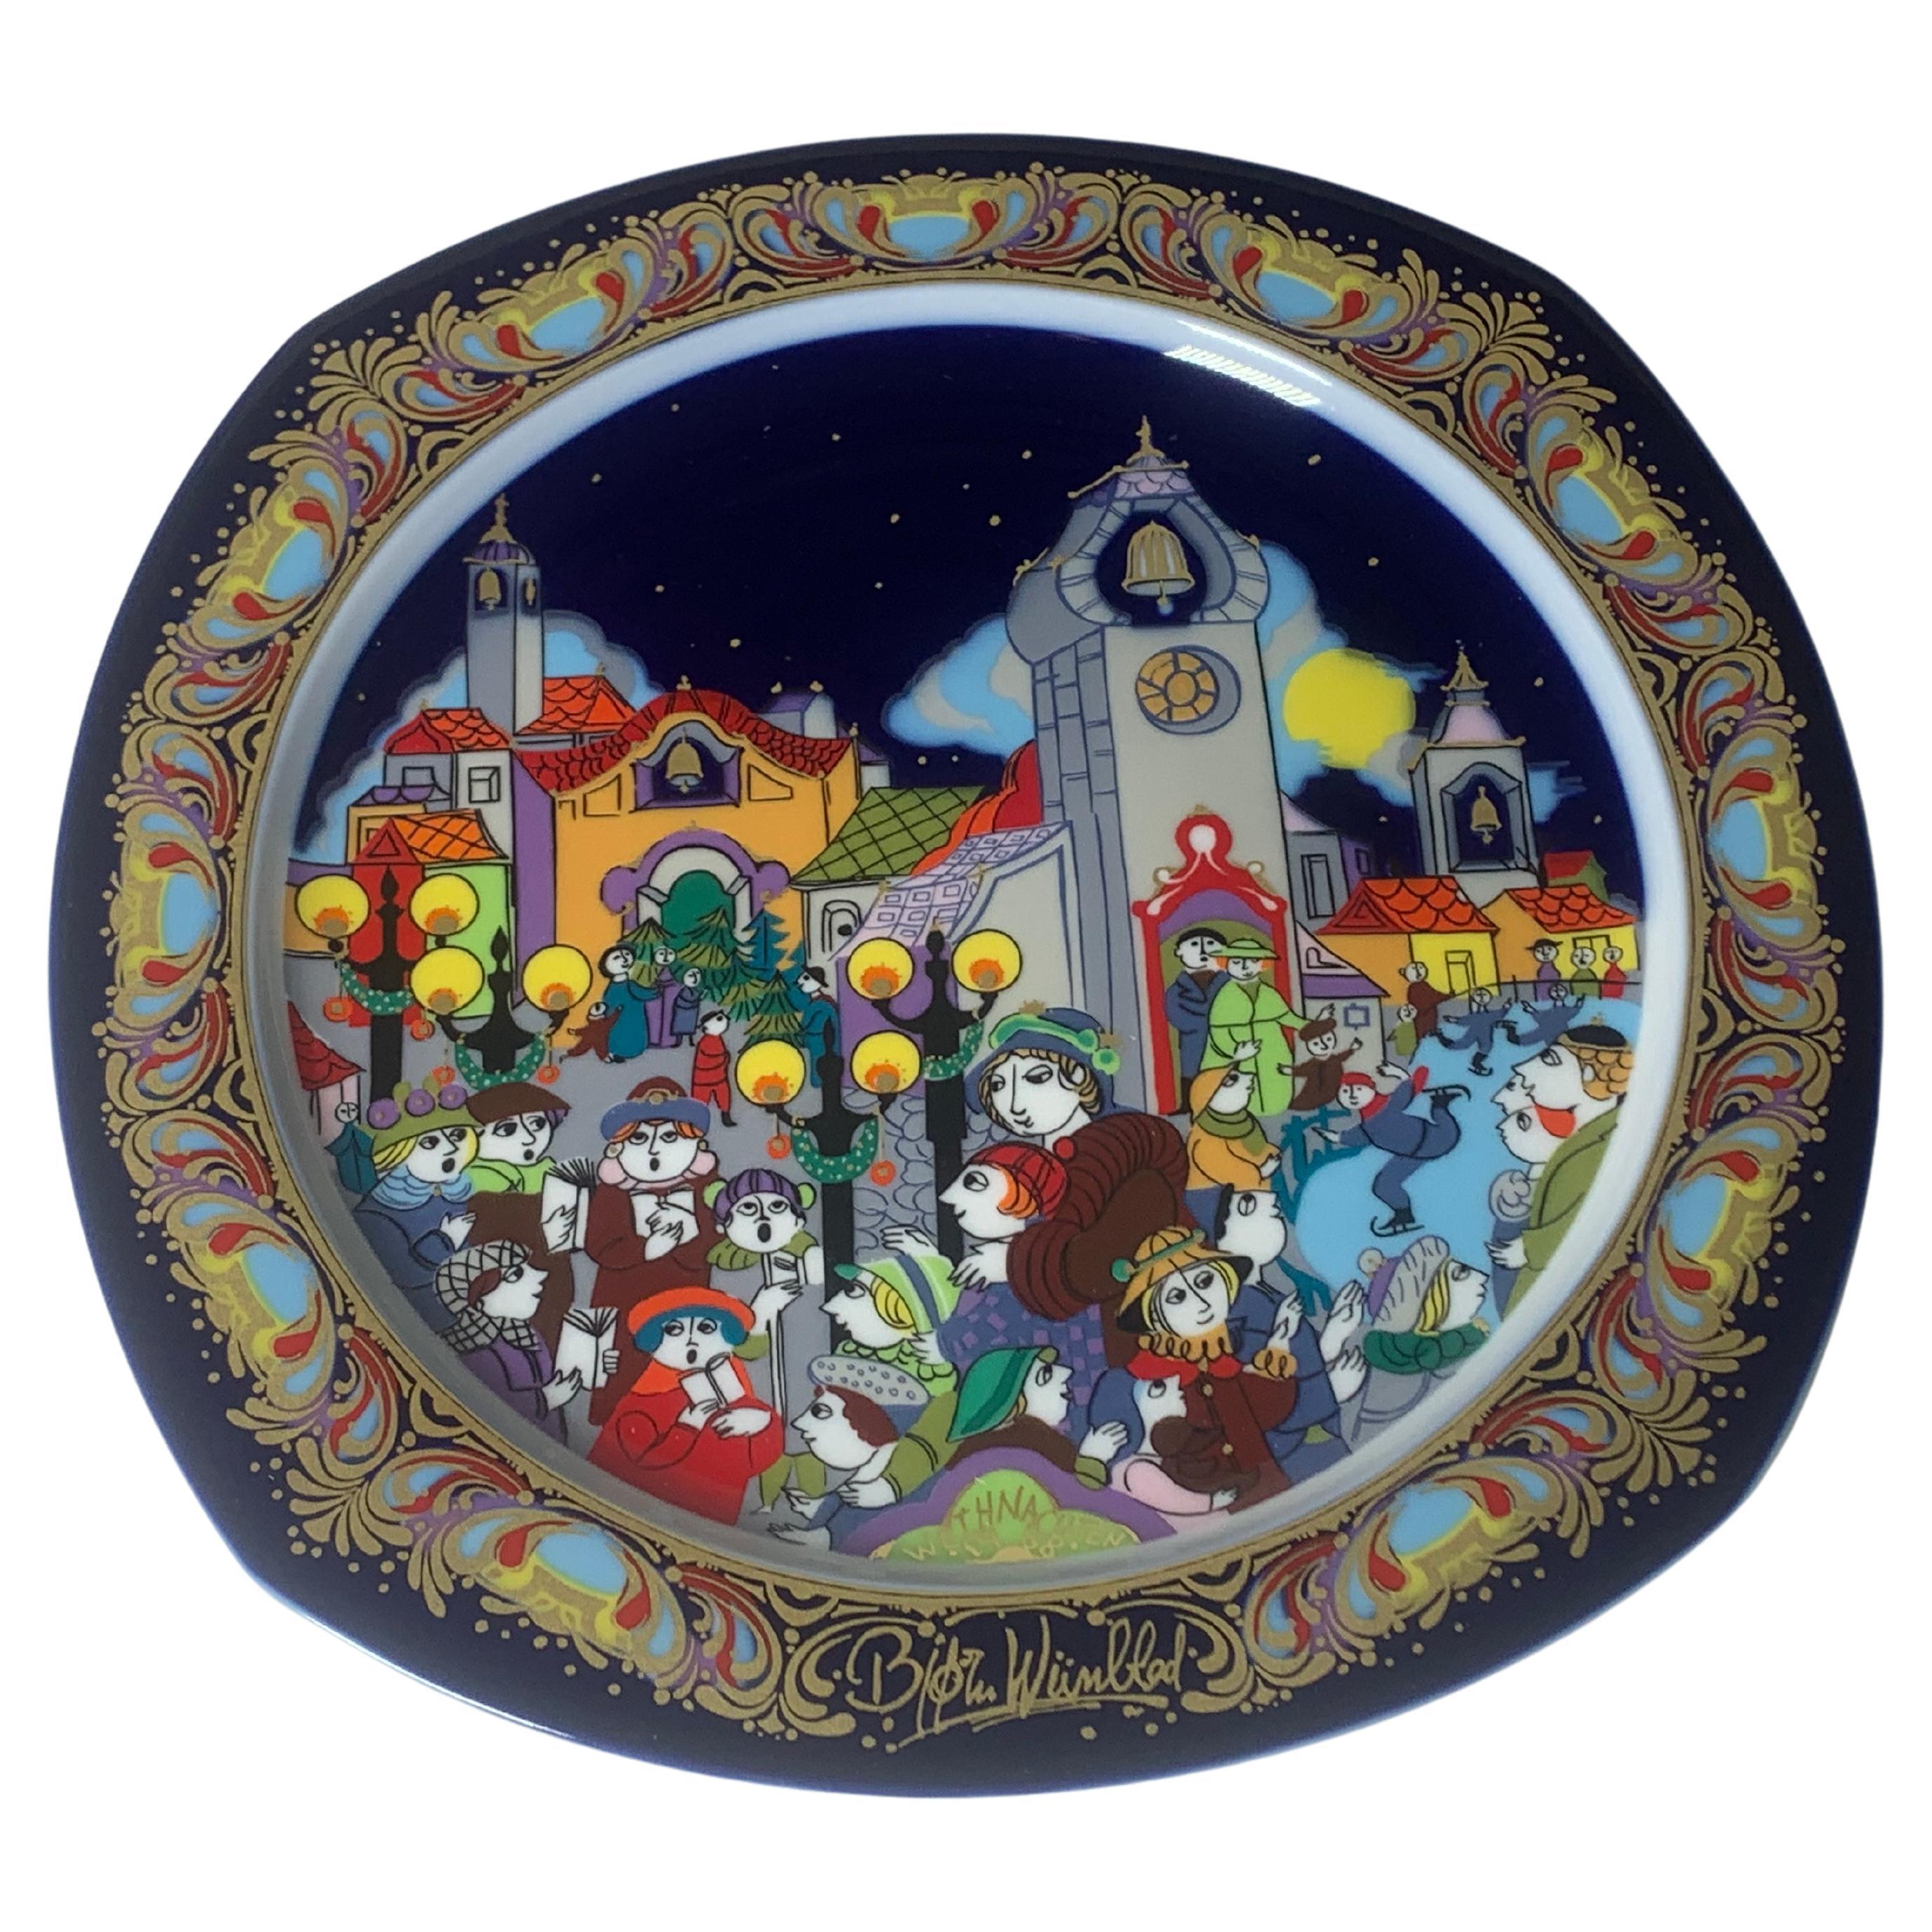 Christmas Songs Plate by Bjorn Wiinblad for Rosenthal from 1988